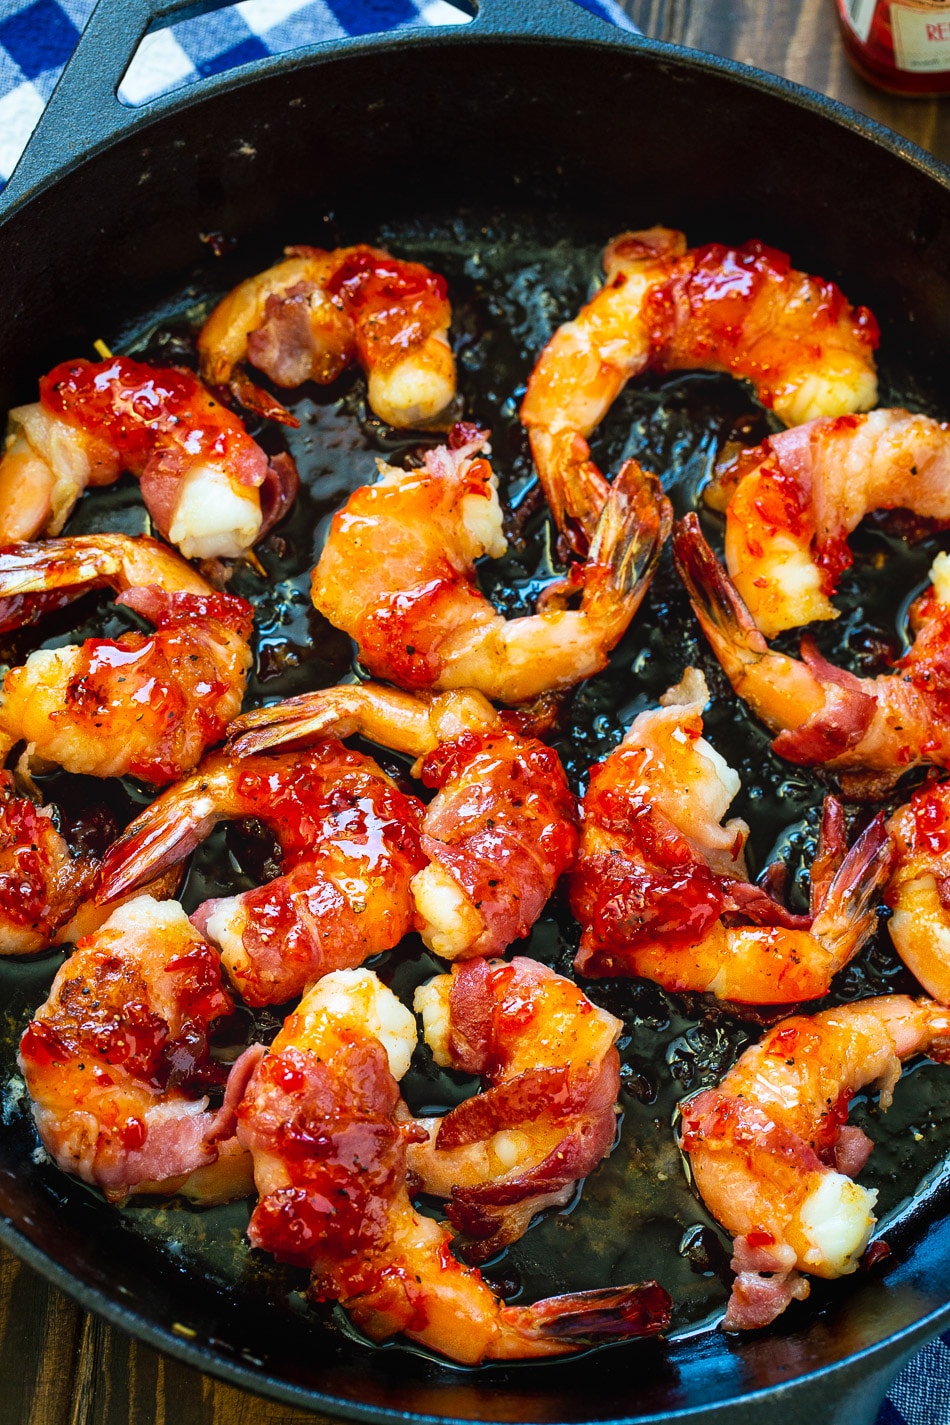 Shrimp wrapped in bacon in cast iron pan.